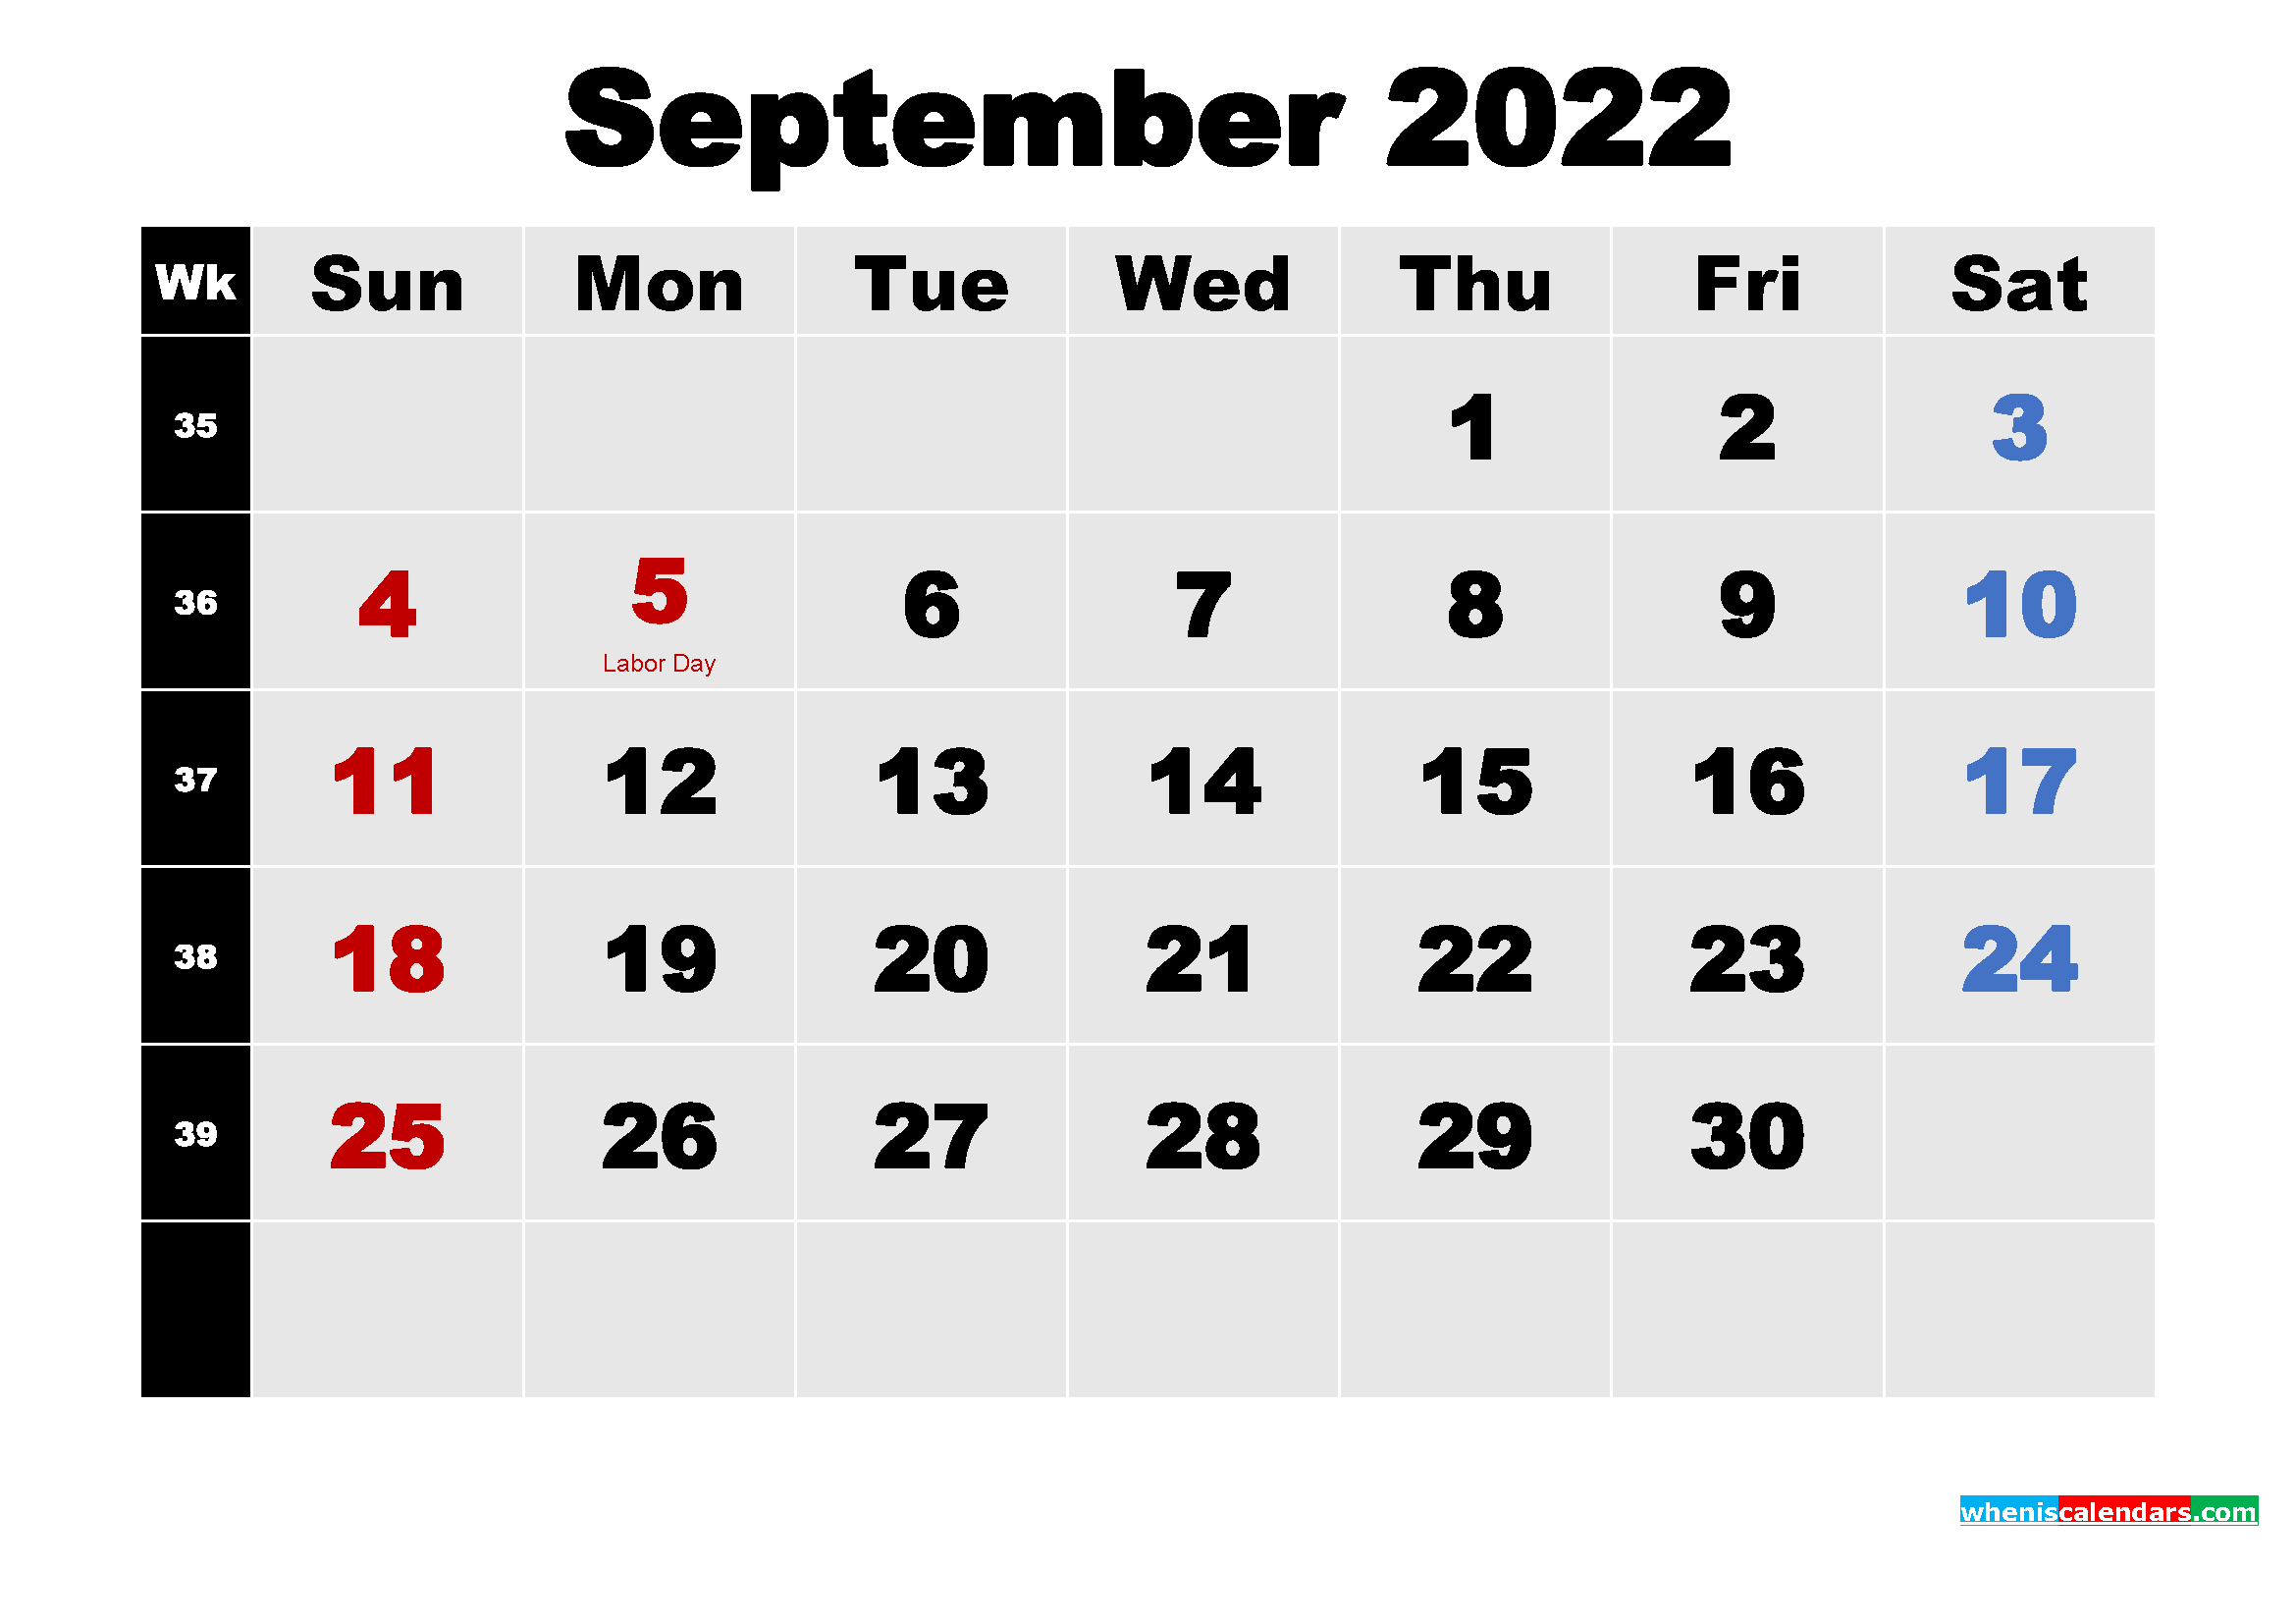 September 2022 Calendar With Holidays Wallpapers